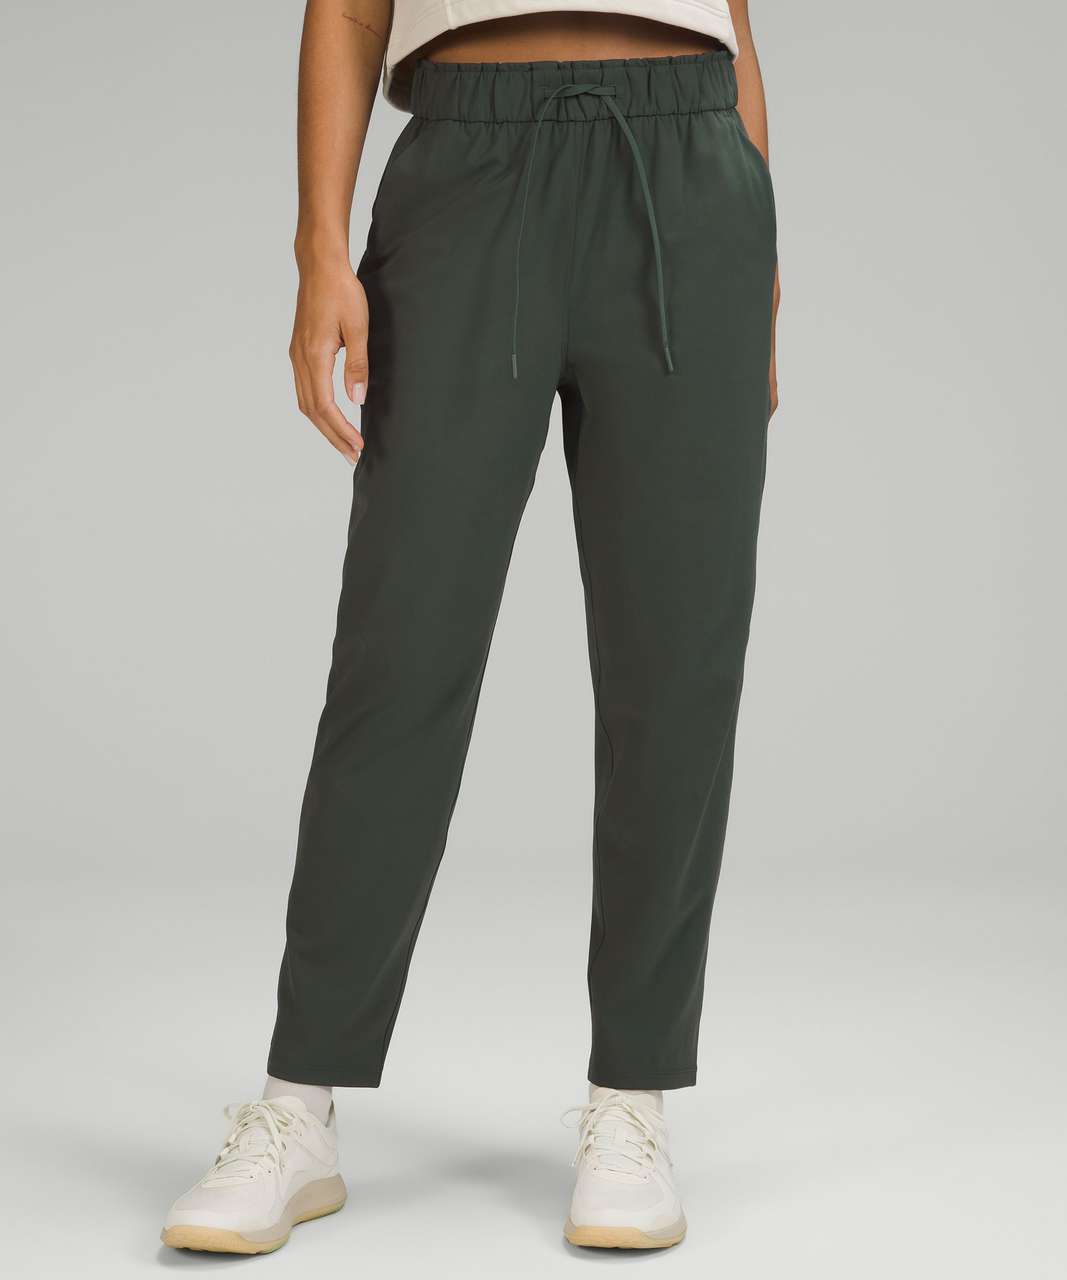 Lululemon Stretch High-Rise Pant 7/8 Length for Sale in Boca Raton